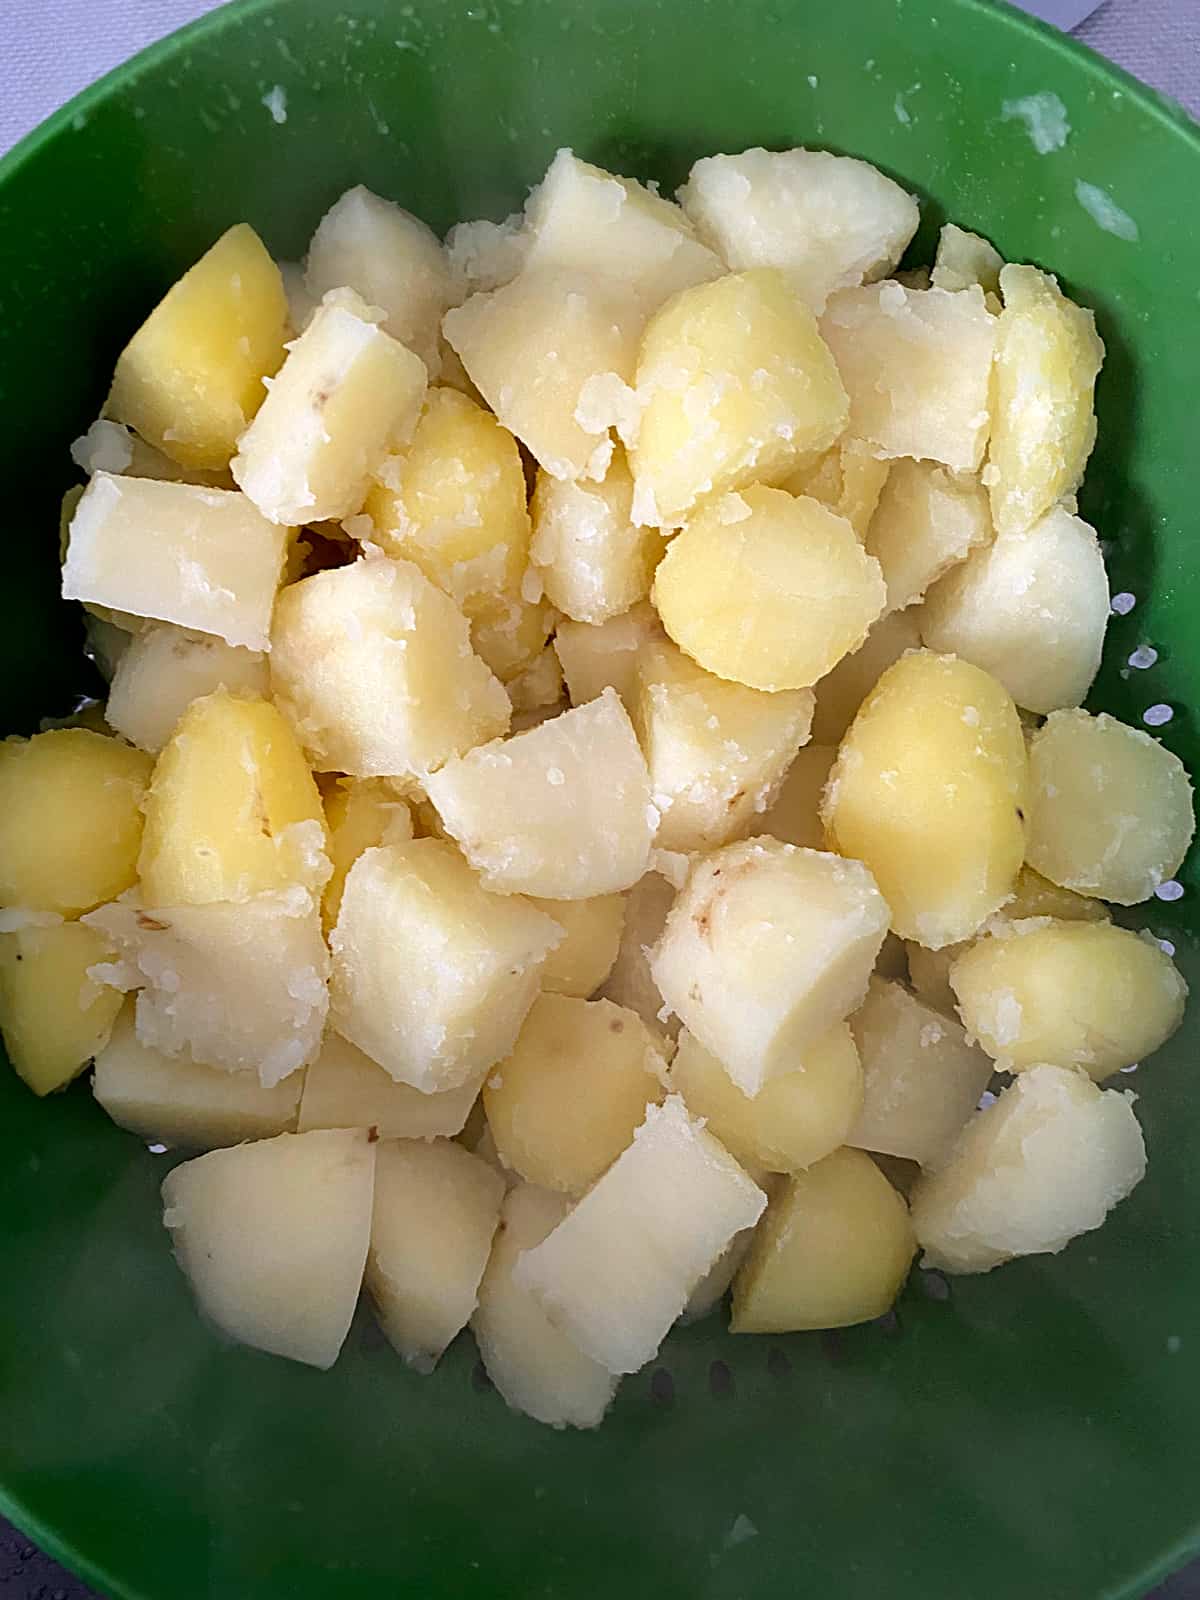 Boiled potatoes with fluffed up edges in a colander.